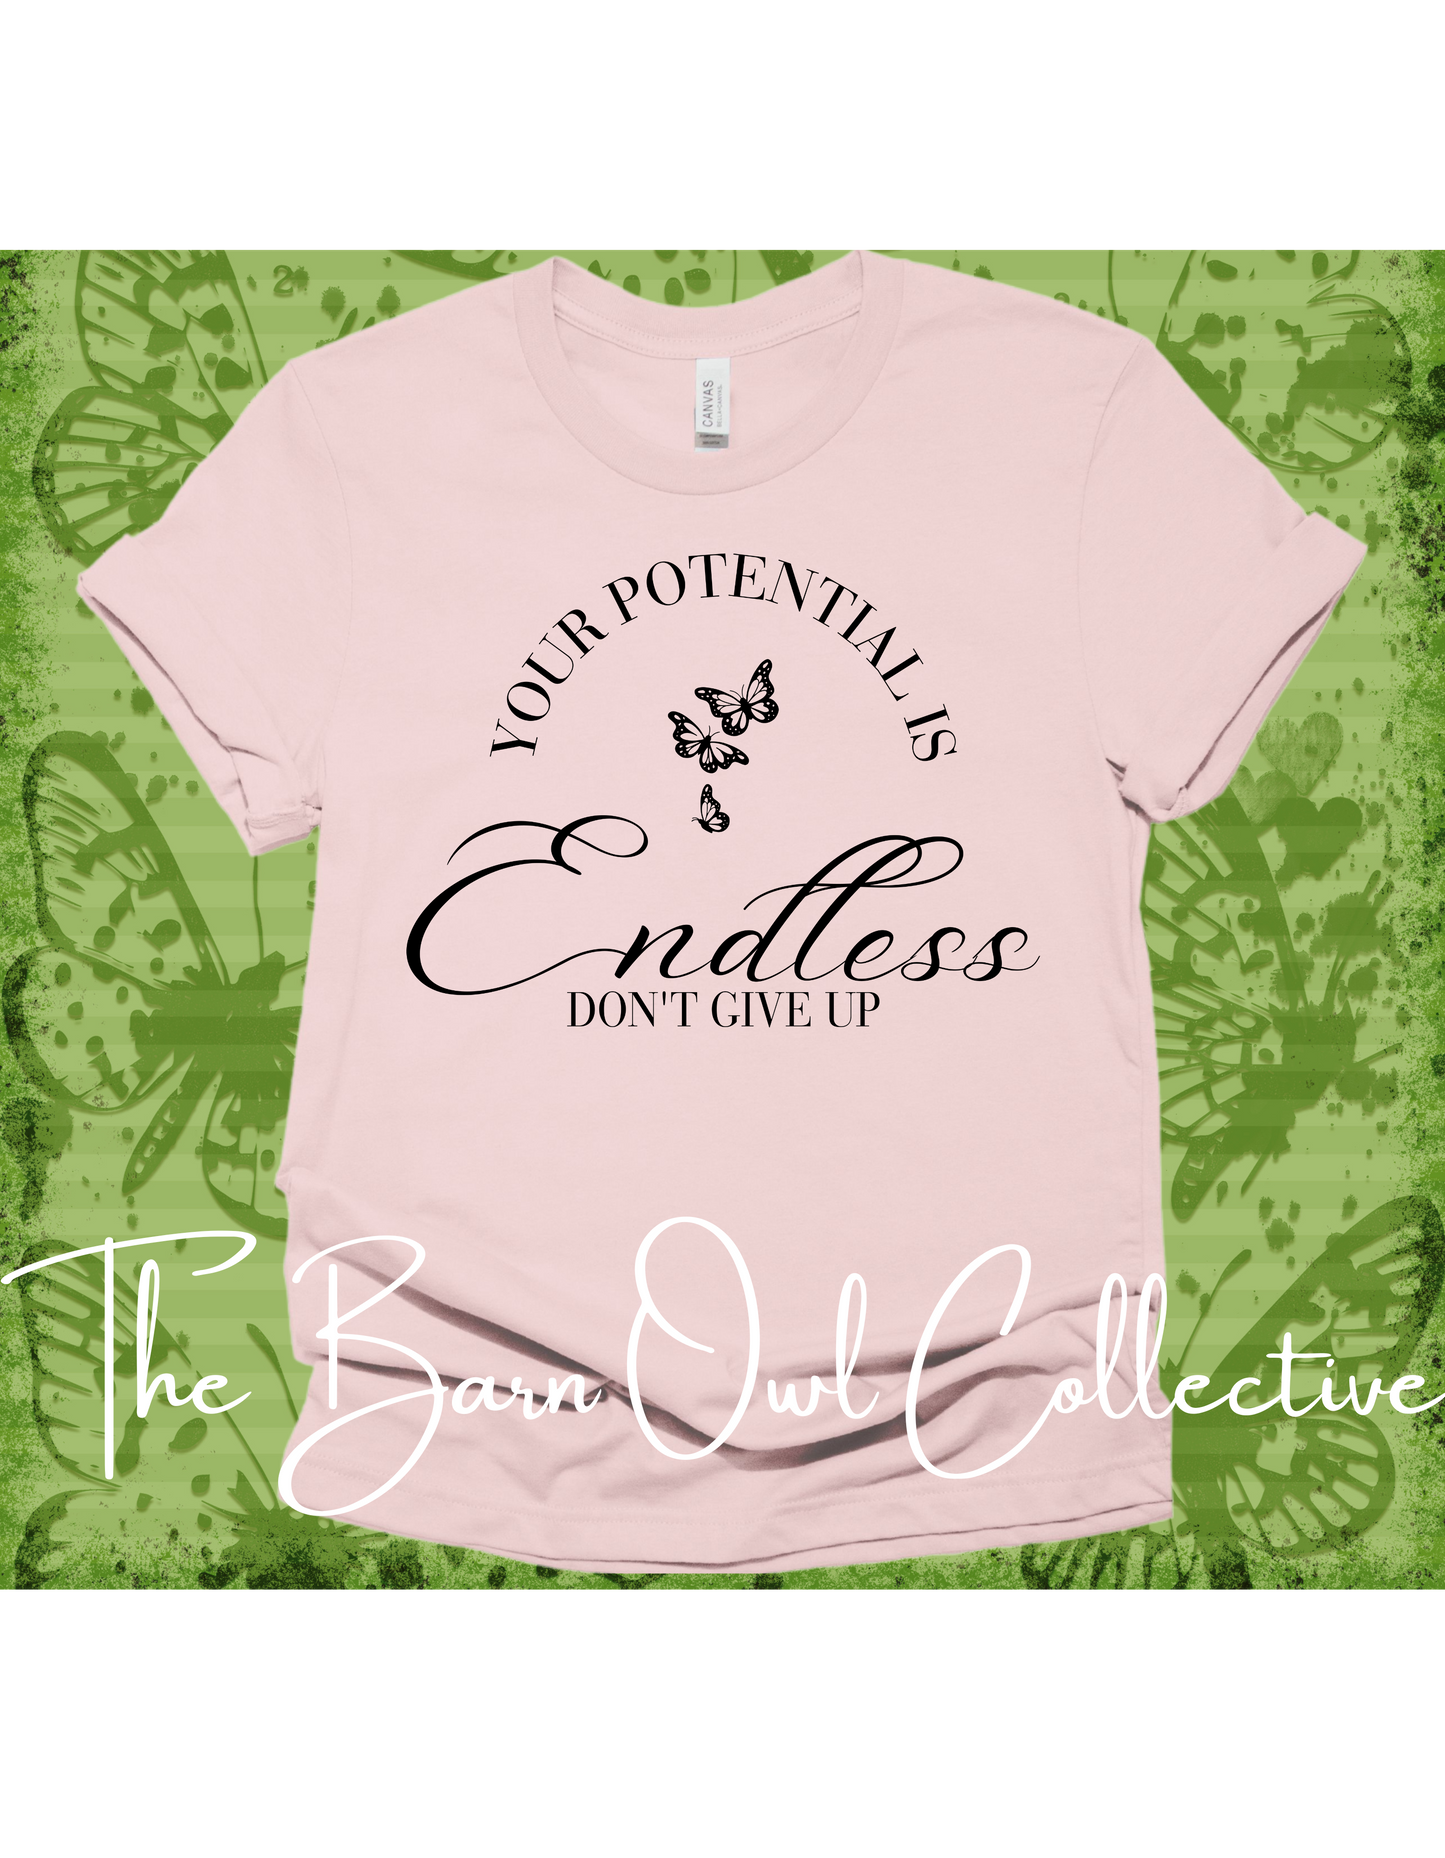 Your Potential Is Endless Graphic T-Shirt